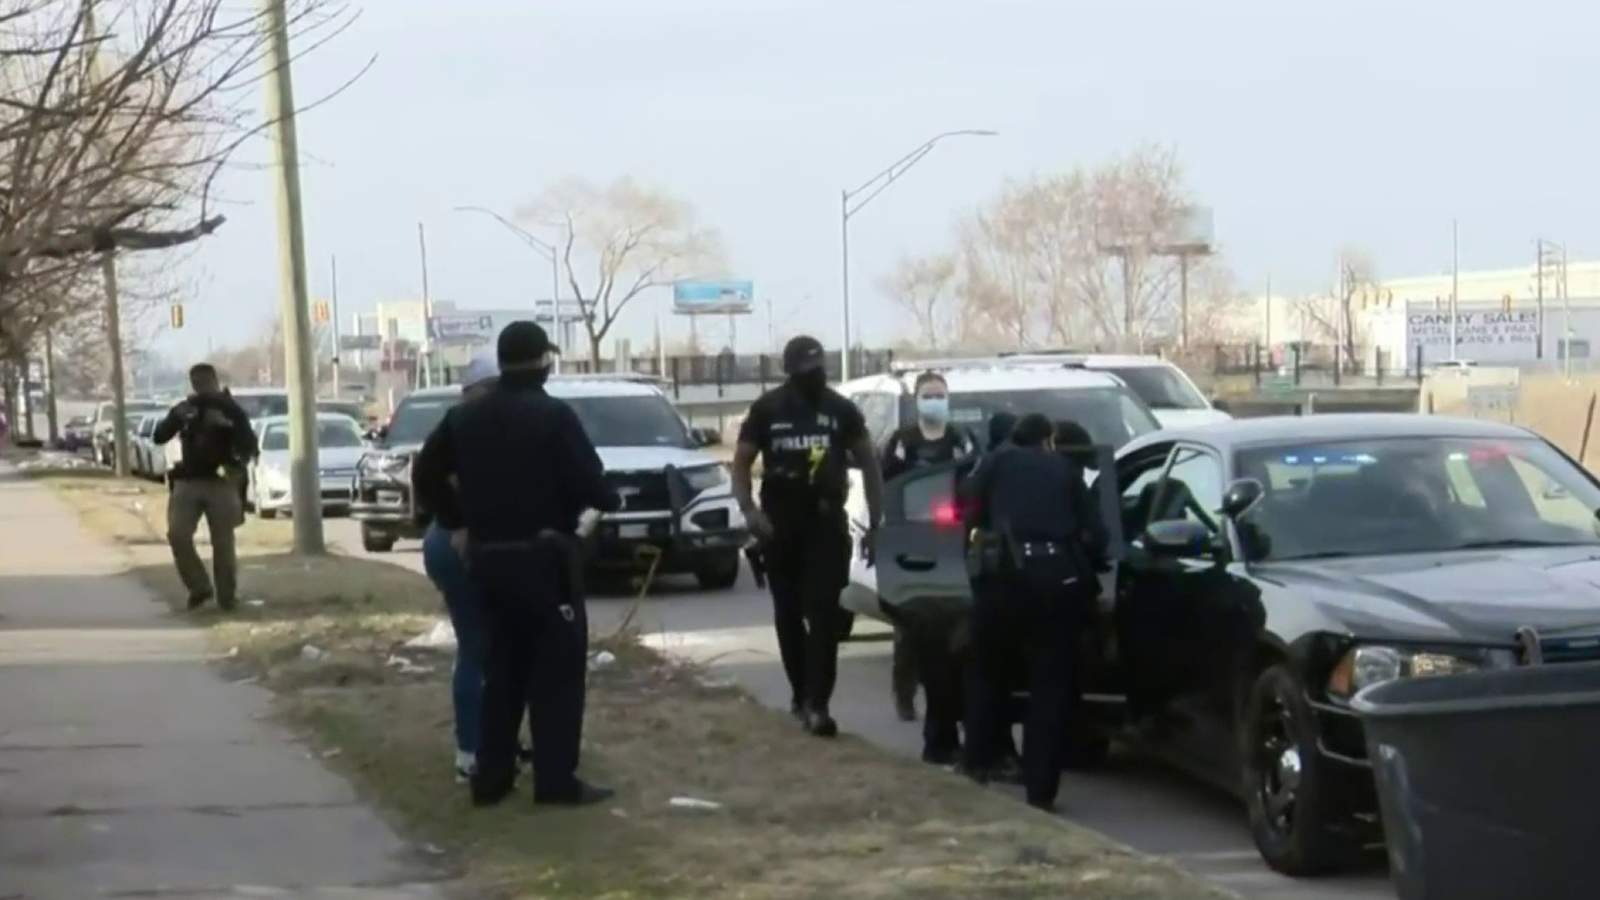 Detroit police recover 7-year-old who was in vehicle during carjacking